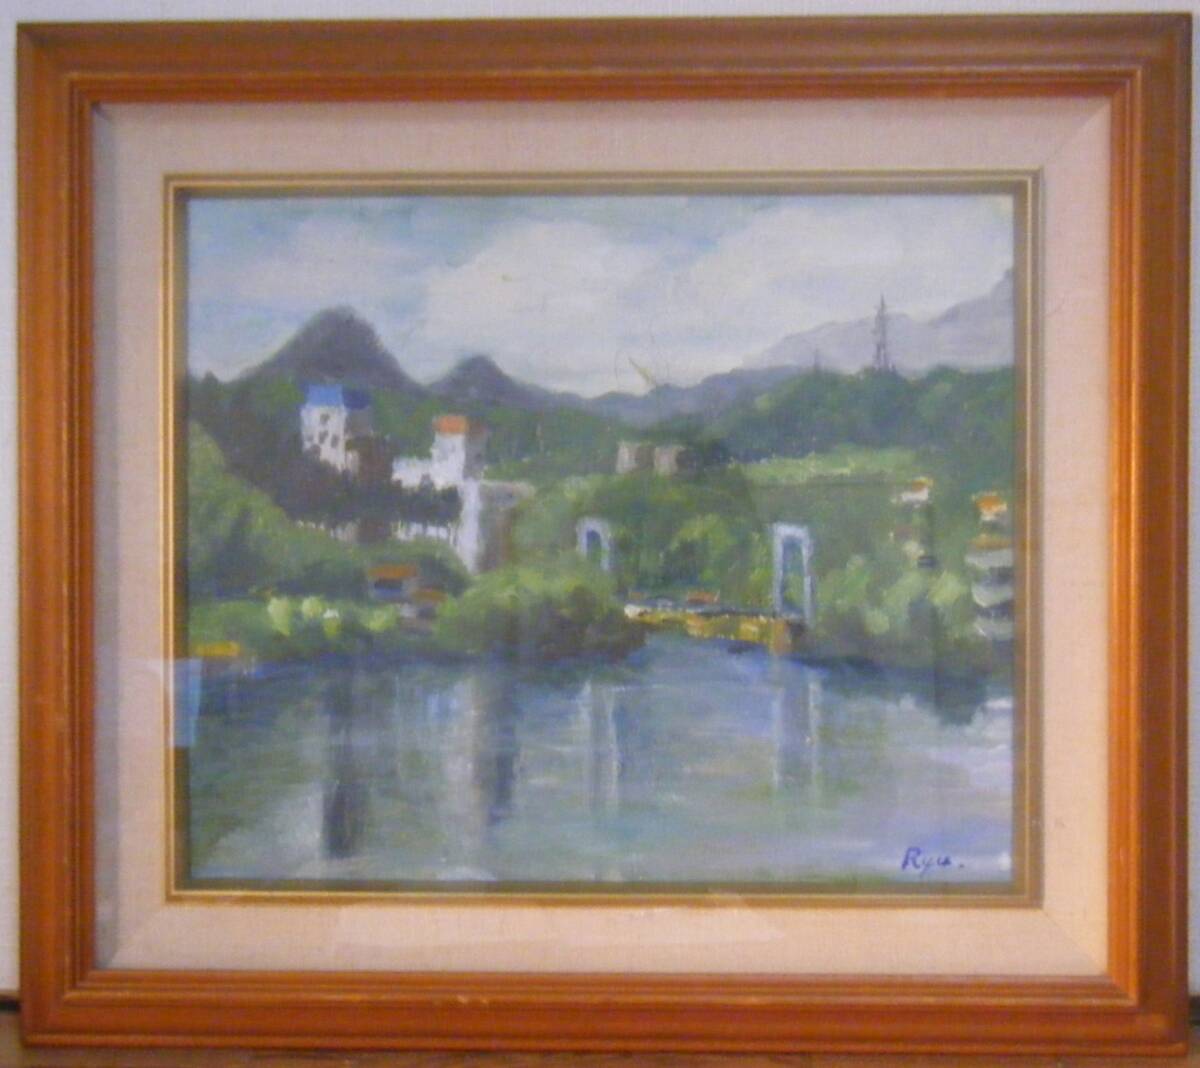 [Authentic] Painting, artist unknown, signed, oil painting, No. 8, Sagami Lake, masterpiece, Q136, Painting, Oil painting, Nature, Landscape painting